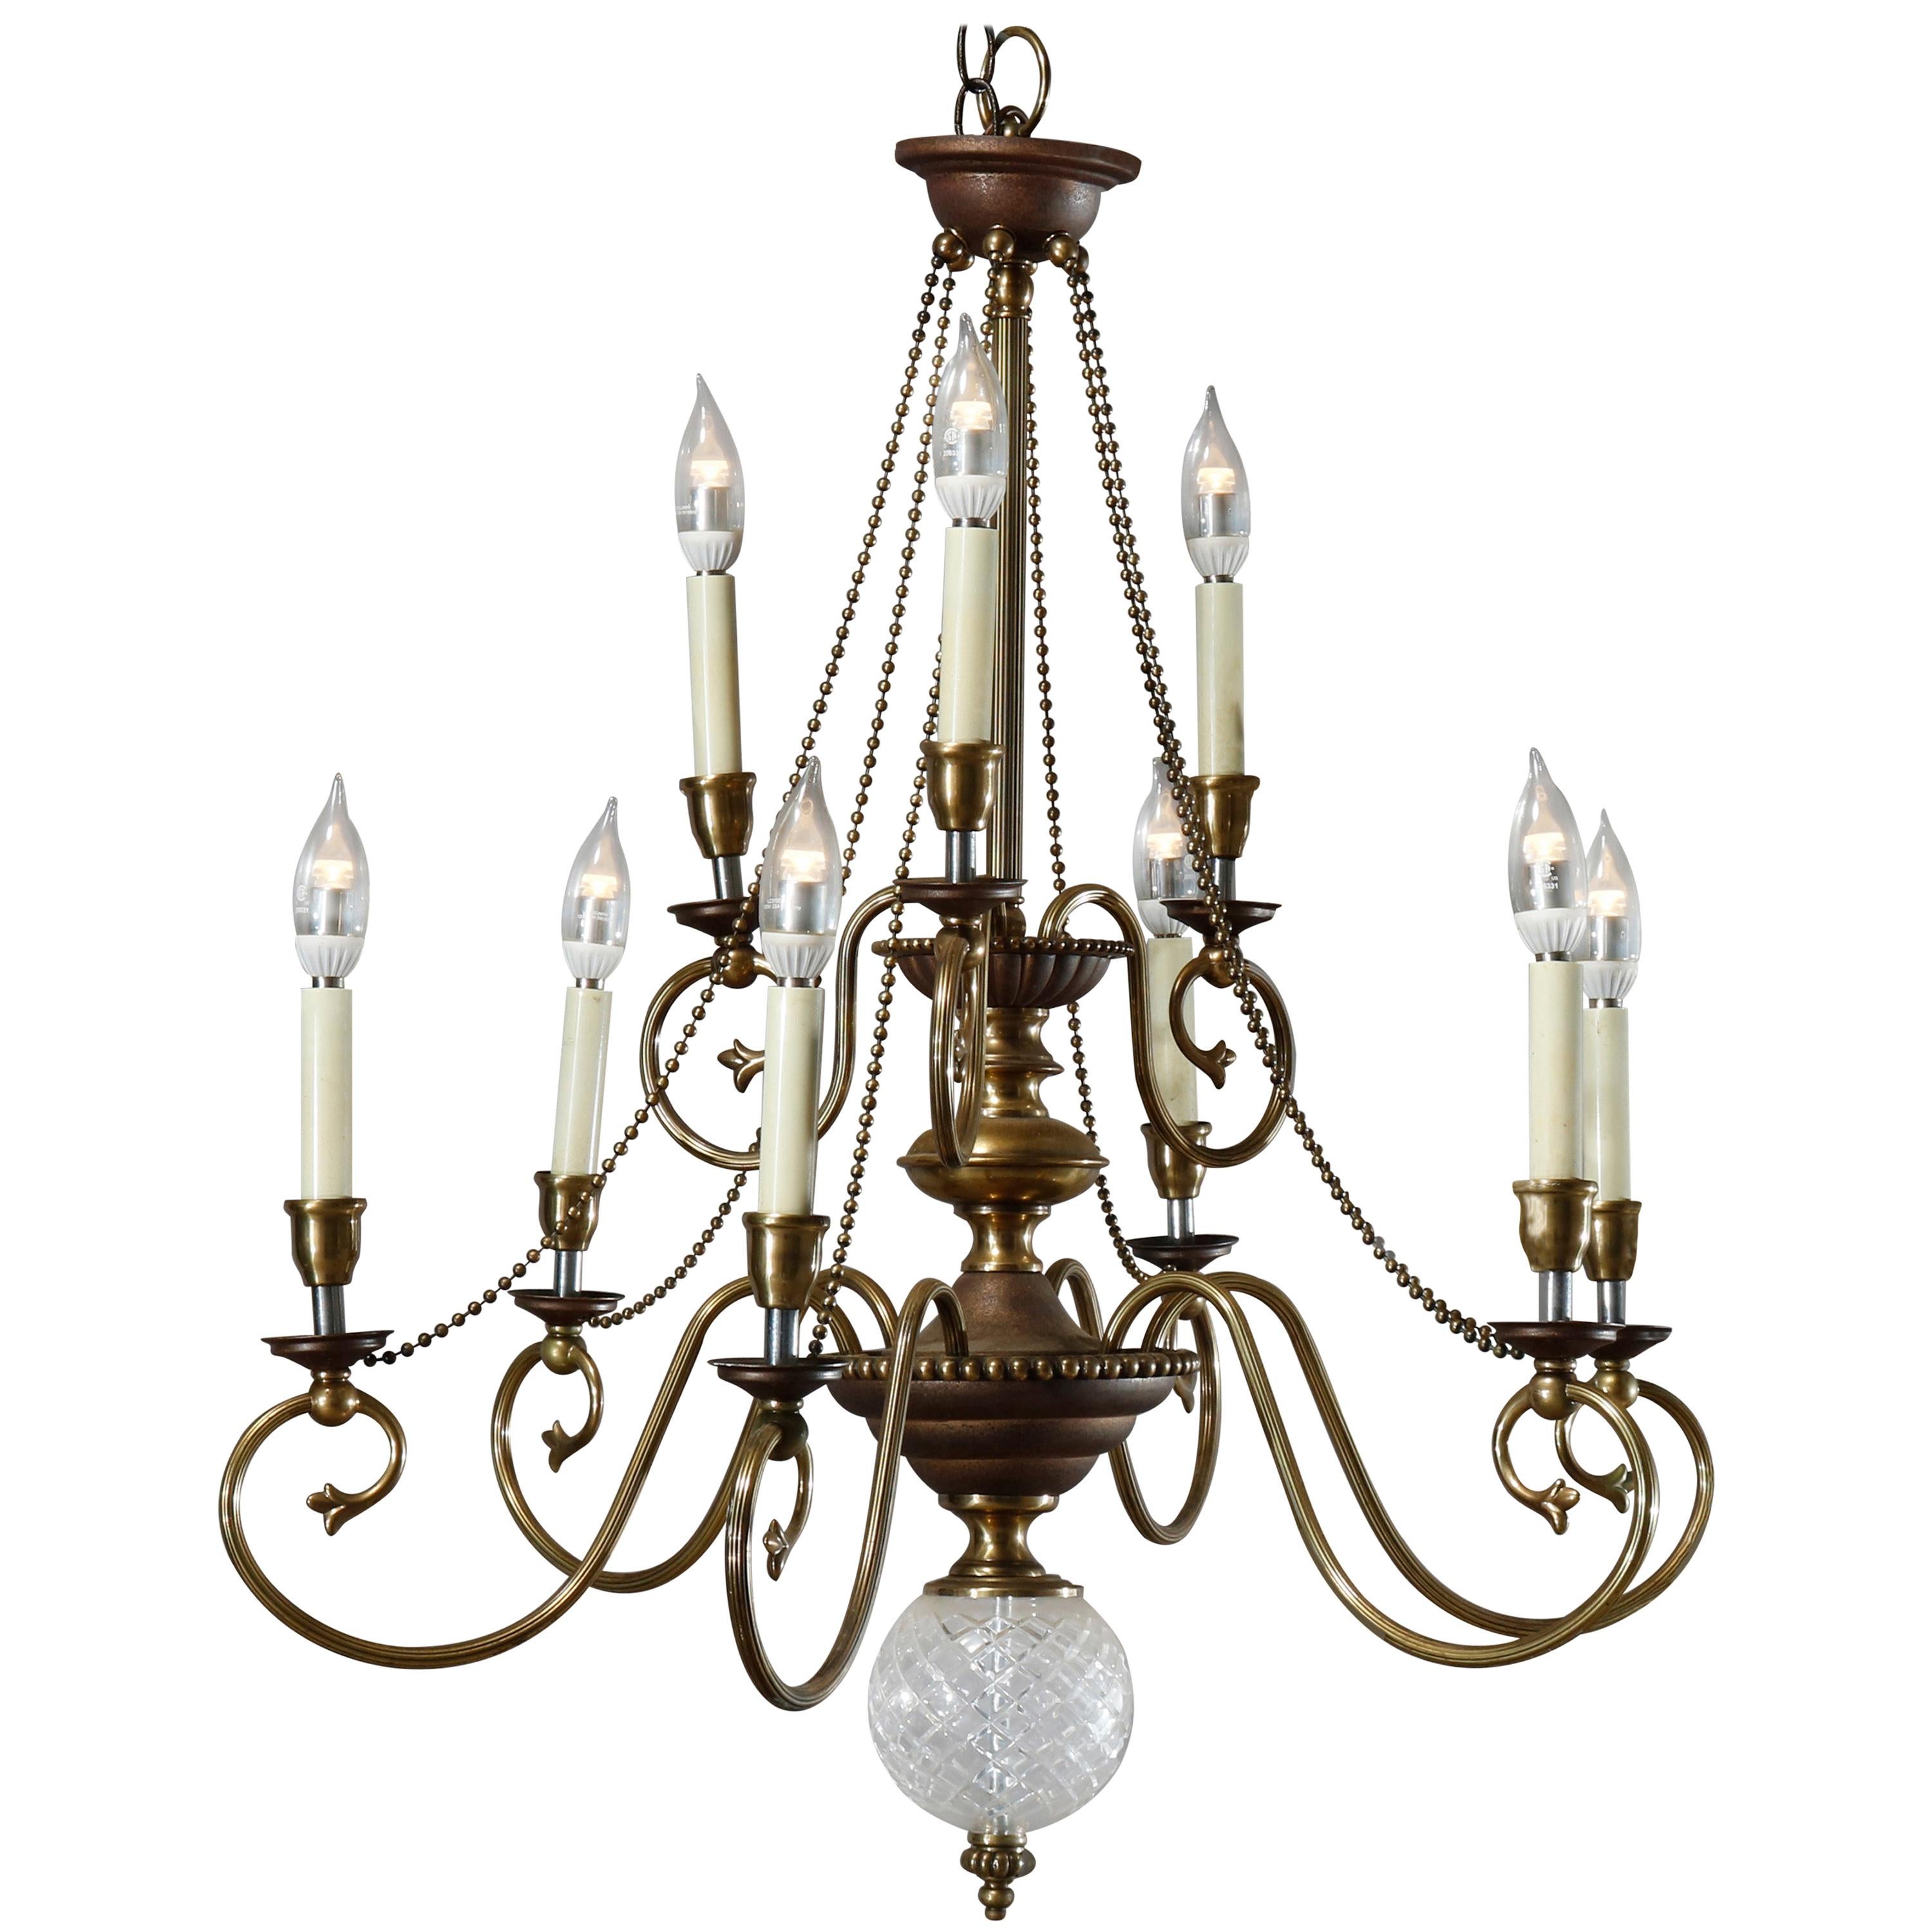 Vintage French Nine-Light Tiered Brass and Crystal Chandelier, 20th Century